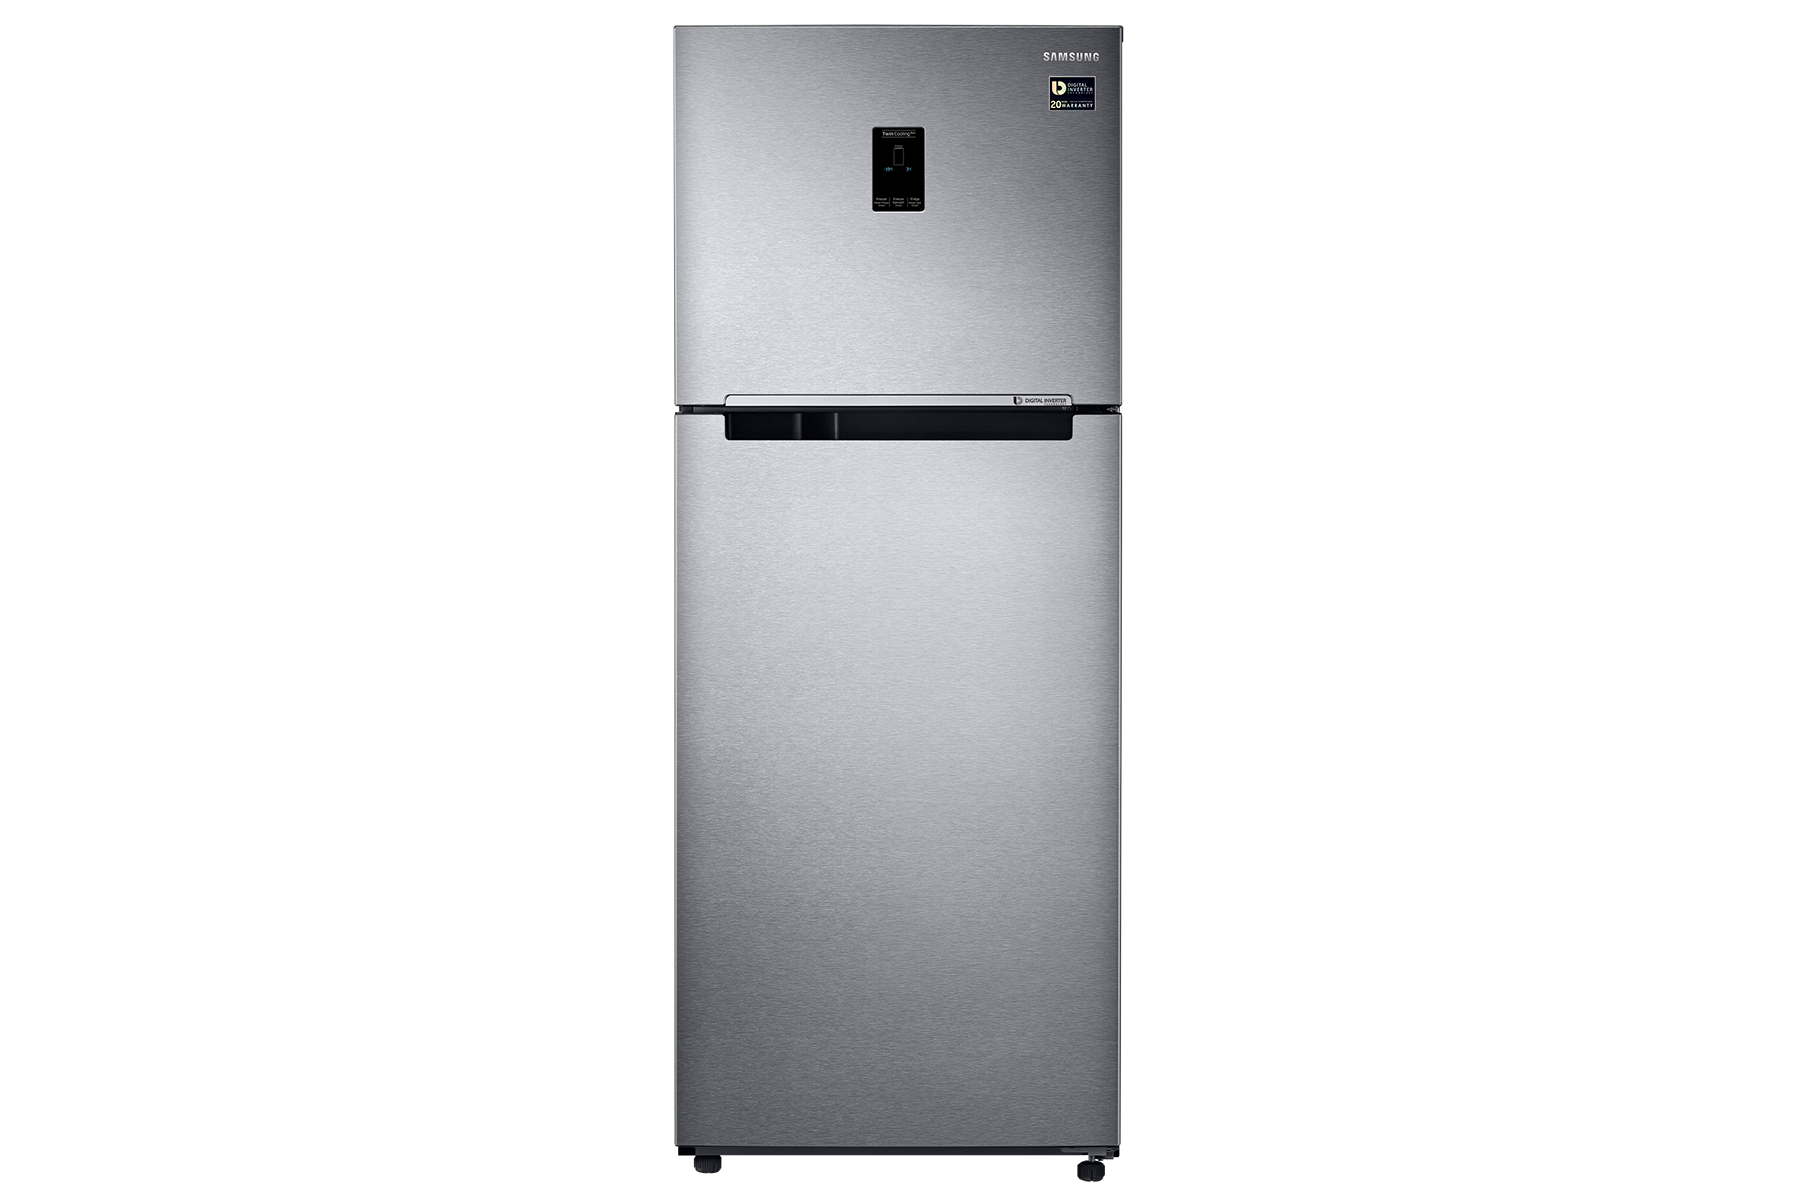 Front view of Samsung Top Mount No Frost Easy Clean Steel Refrigerator 12.9 Cu. Ft. with Twin Cooling Plus (Silver). Comes with stylish 2-door design.